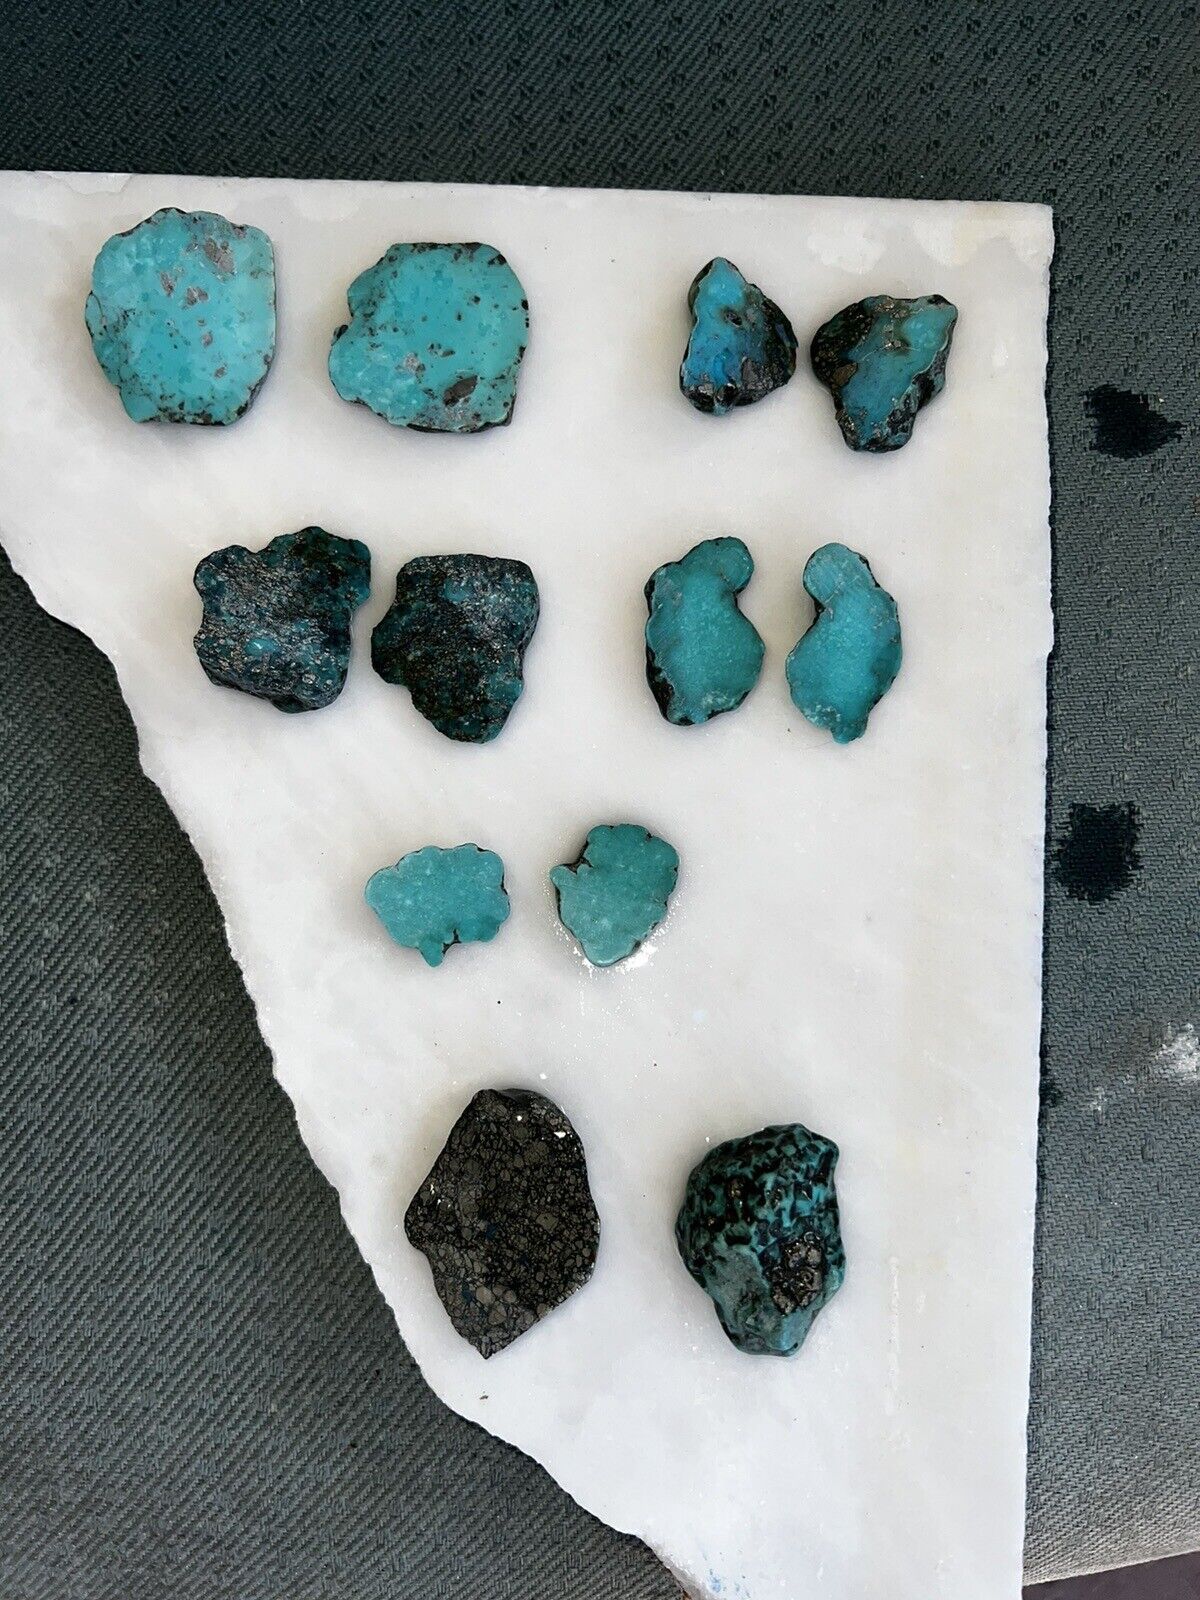 Nacozari turquoise Rough.  Comes From Sonoran Area Of Mexico.